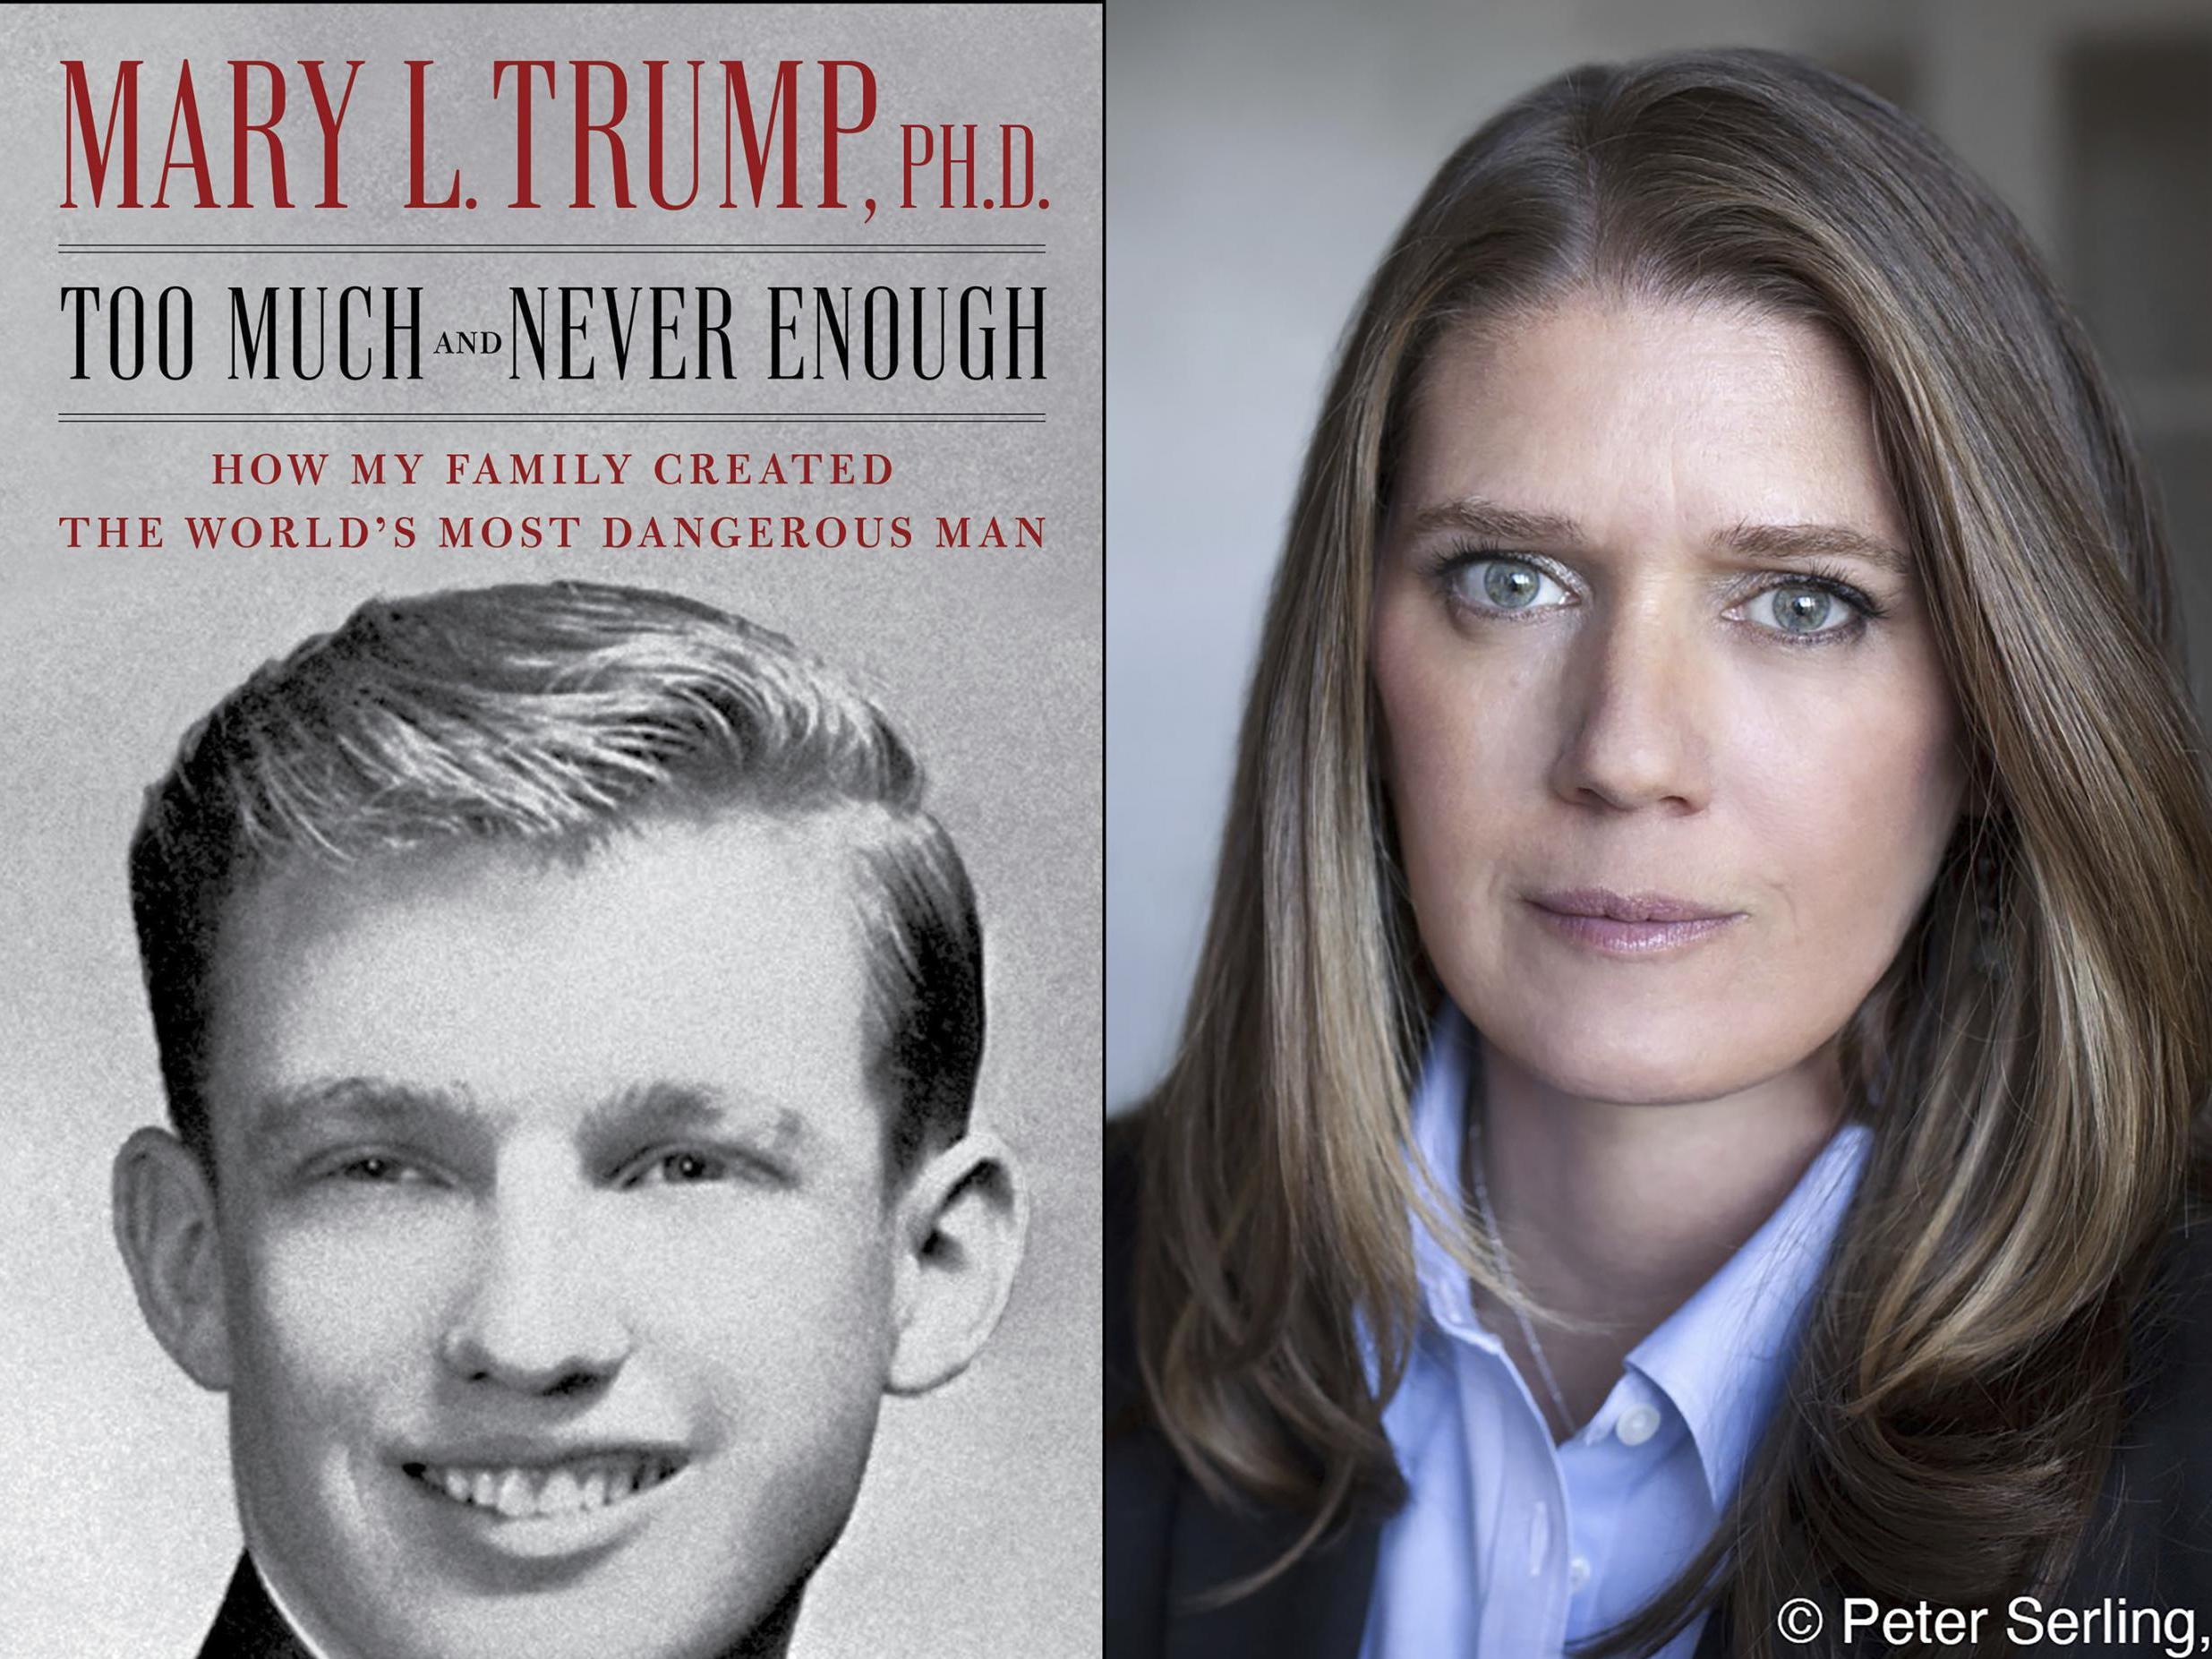 Publication of tell-all Trump book by his niece brought forward despite efforts to block it